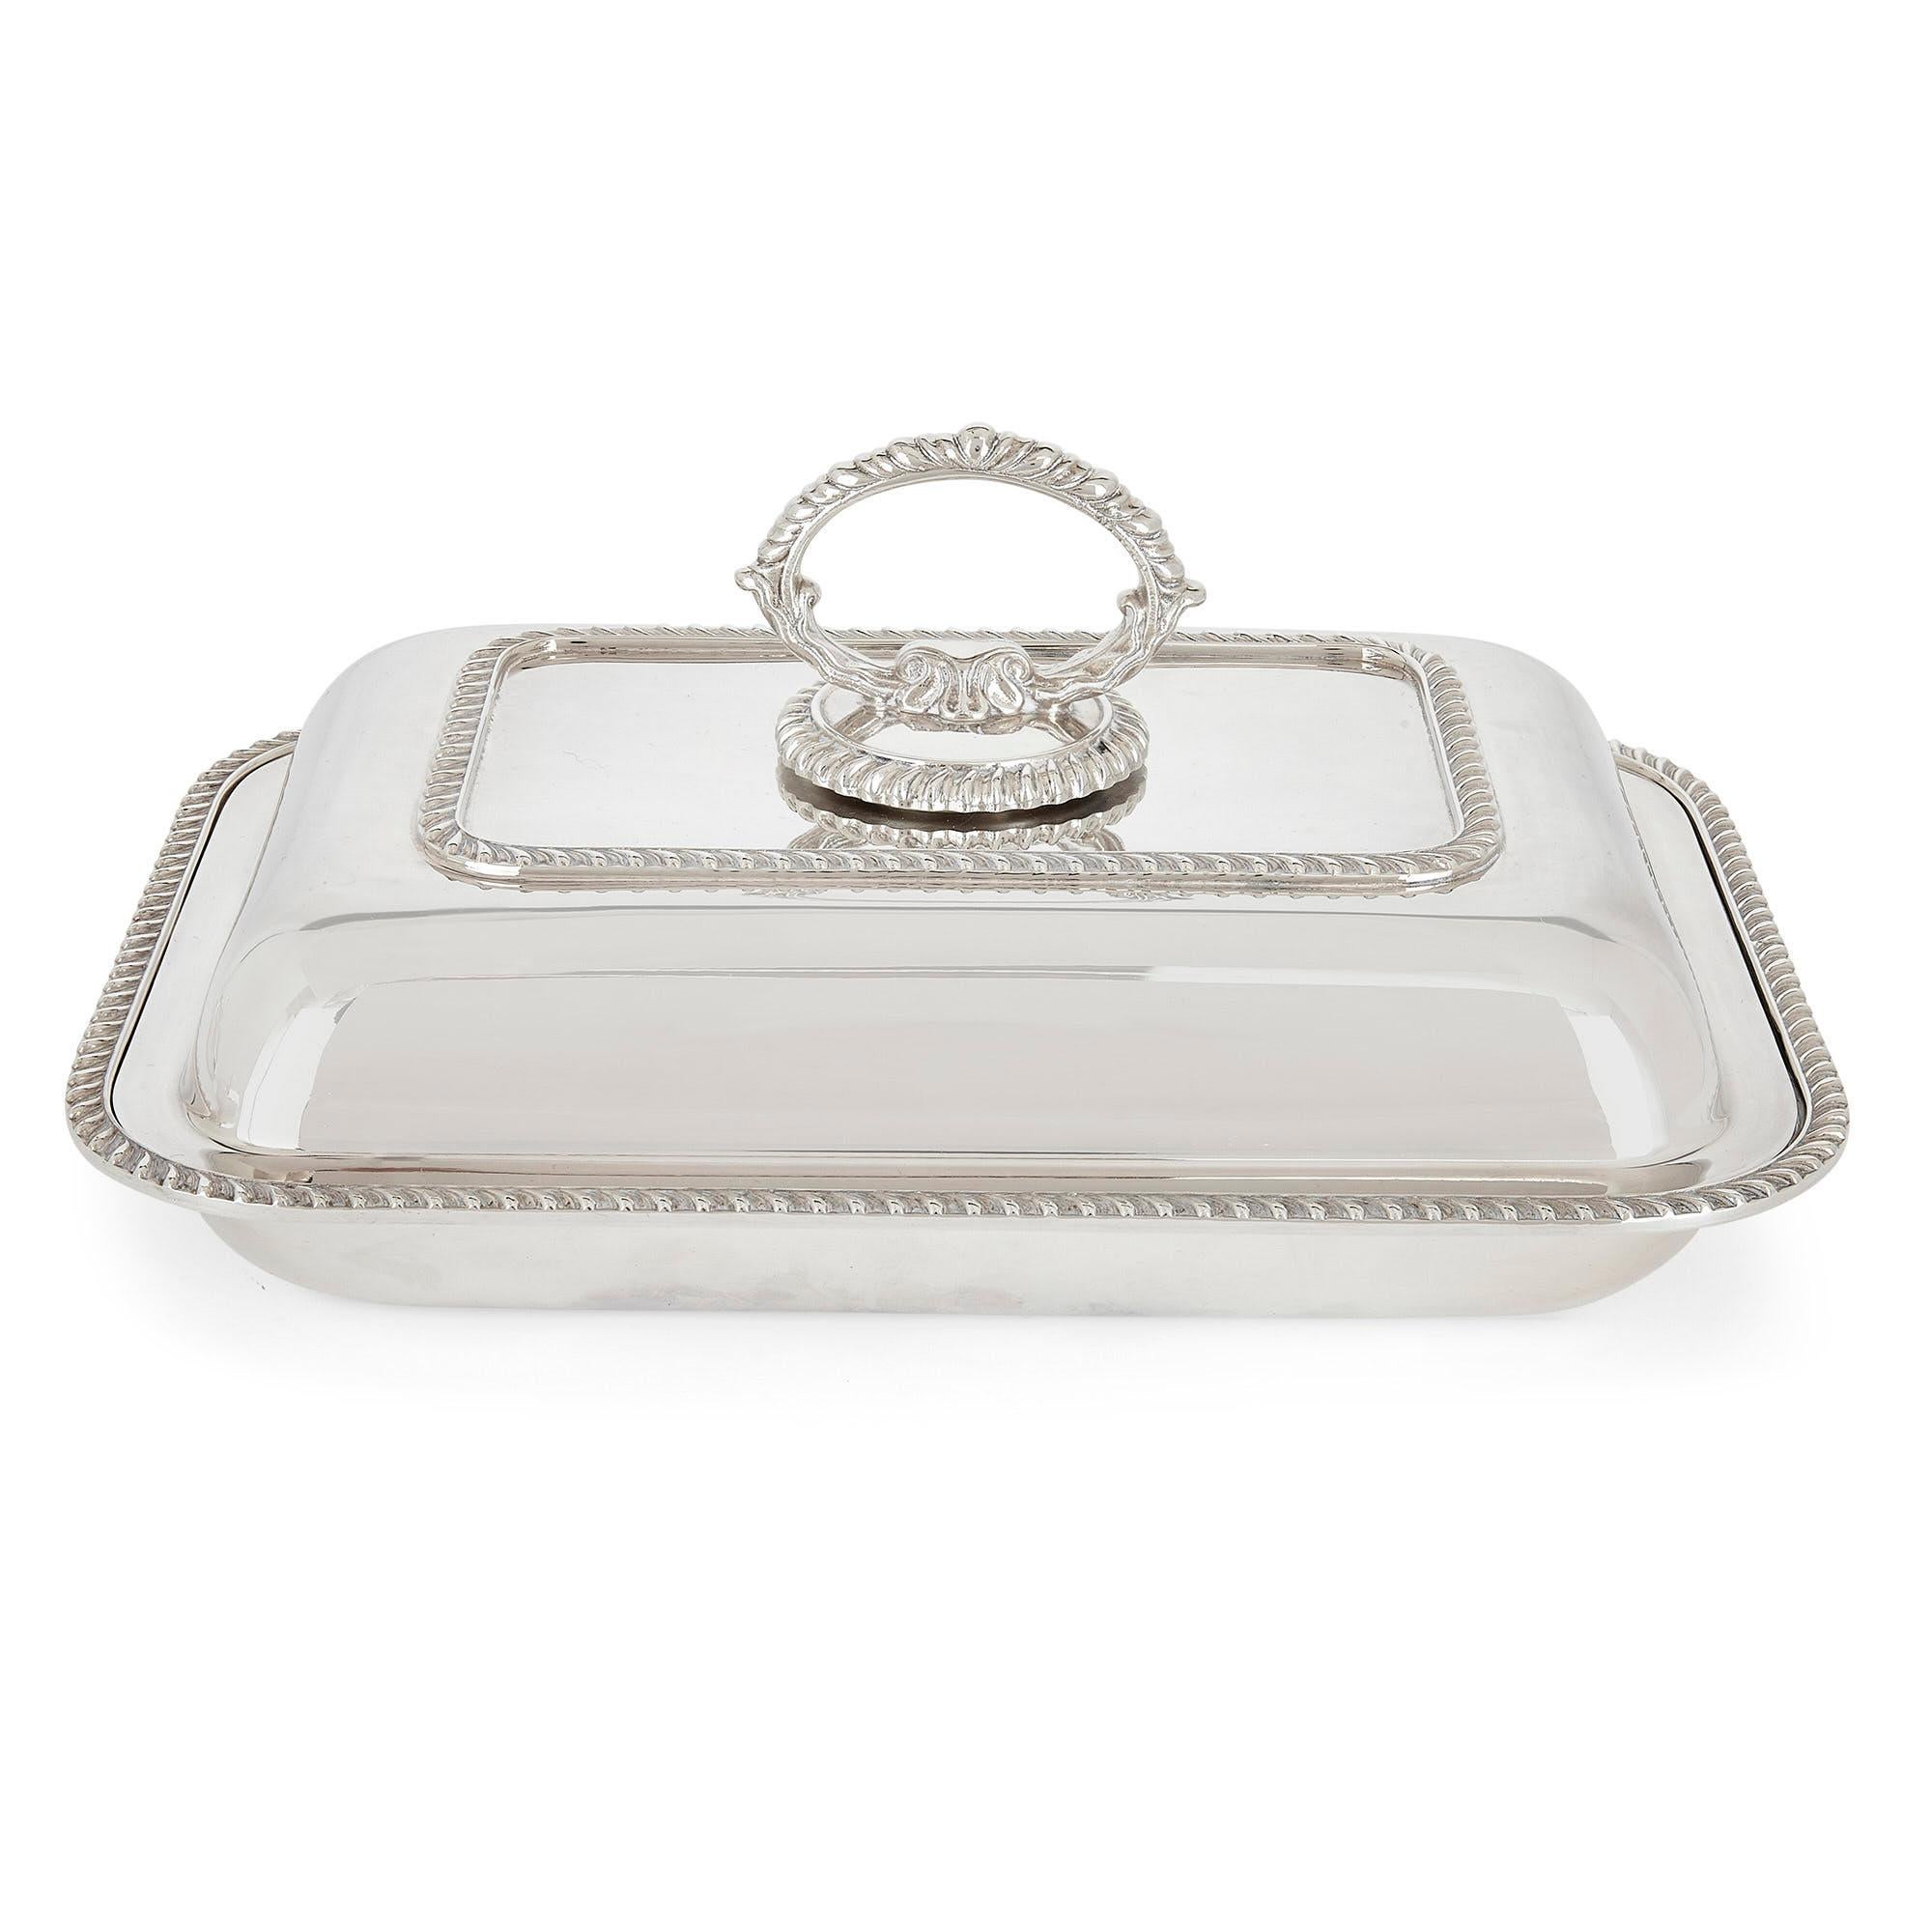 Trio of fine Mappin & Webb silver-plate dishes and covers
English, 20th Century
Dimensions: Height 13cm, width 28cm, depth 20cm

Consisting of three entrée dishes with covers, this set is crafted from silver-plate. Each dish features a moulded